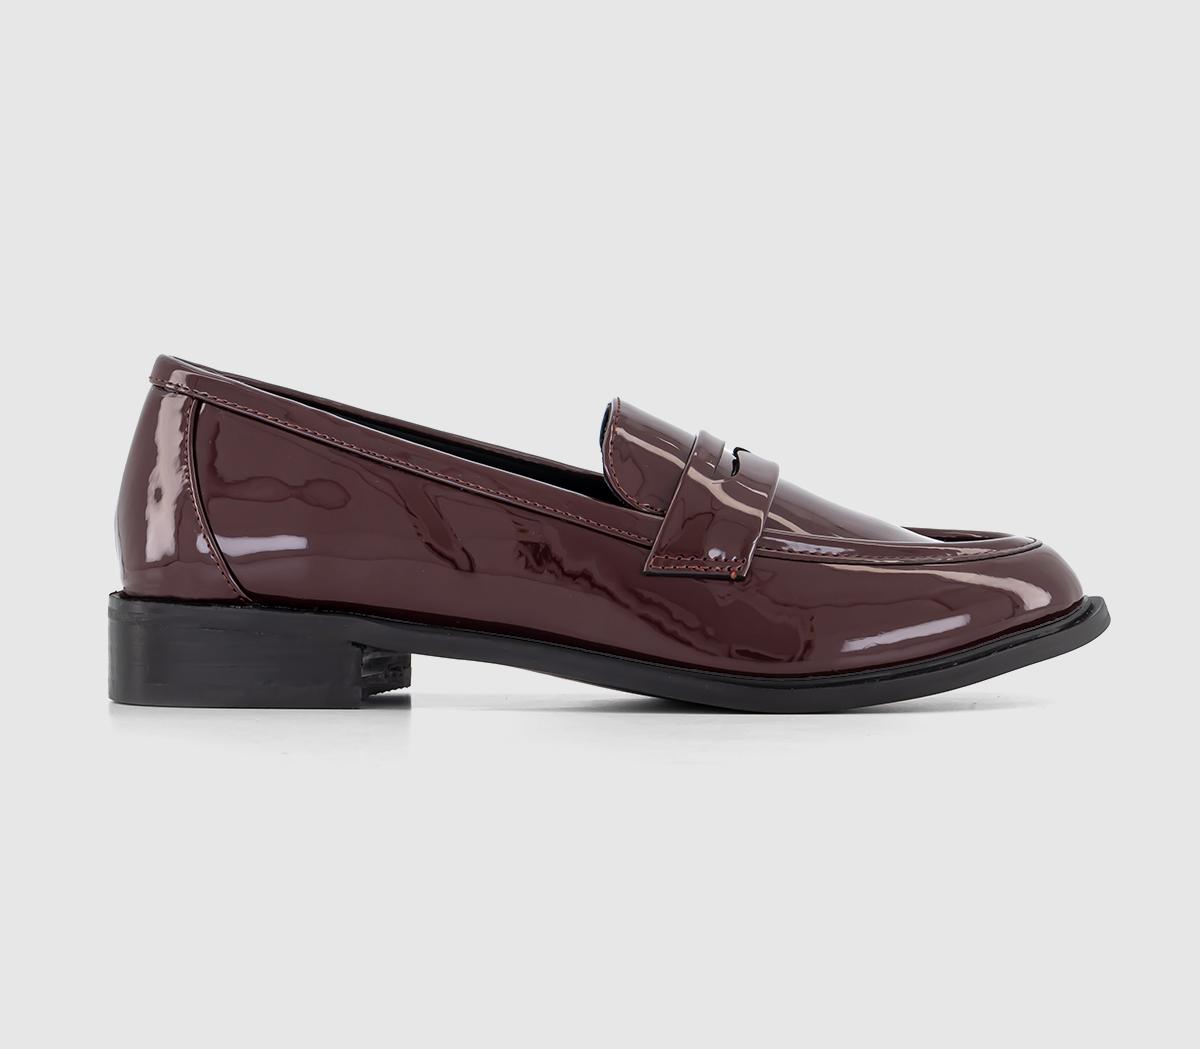 OFFICEFlaming Penny LoafersBurgundy Patent